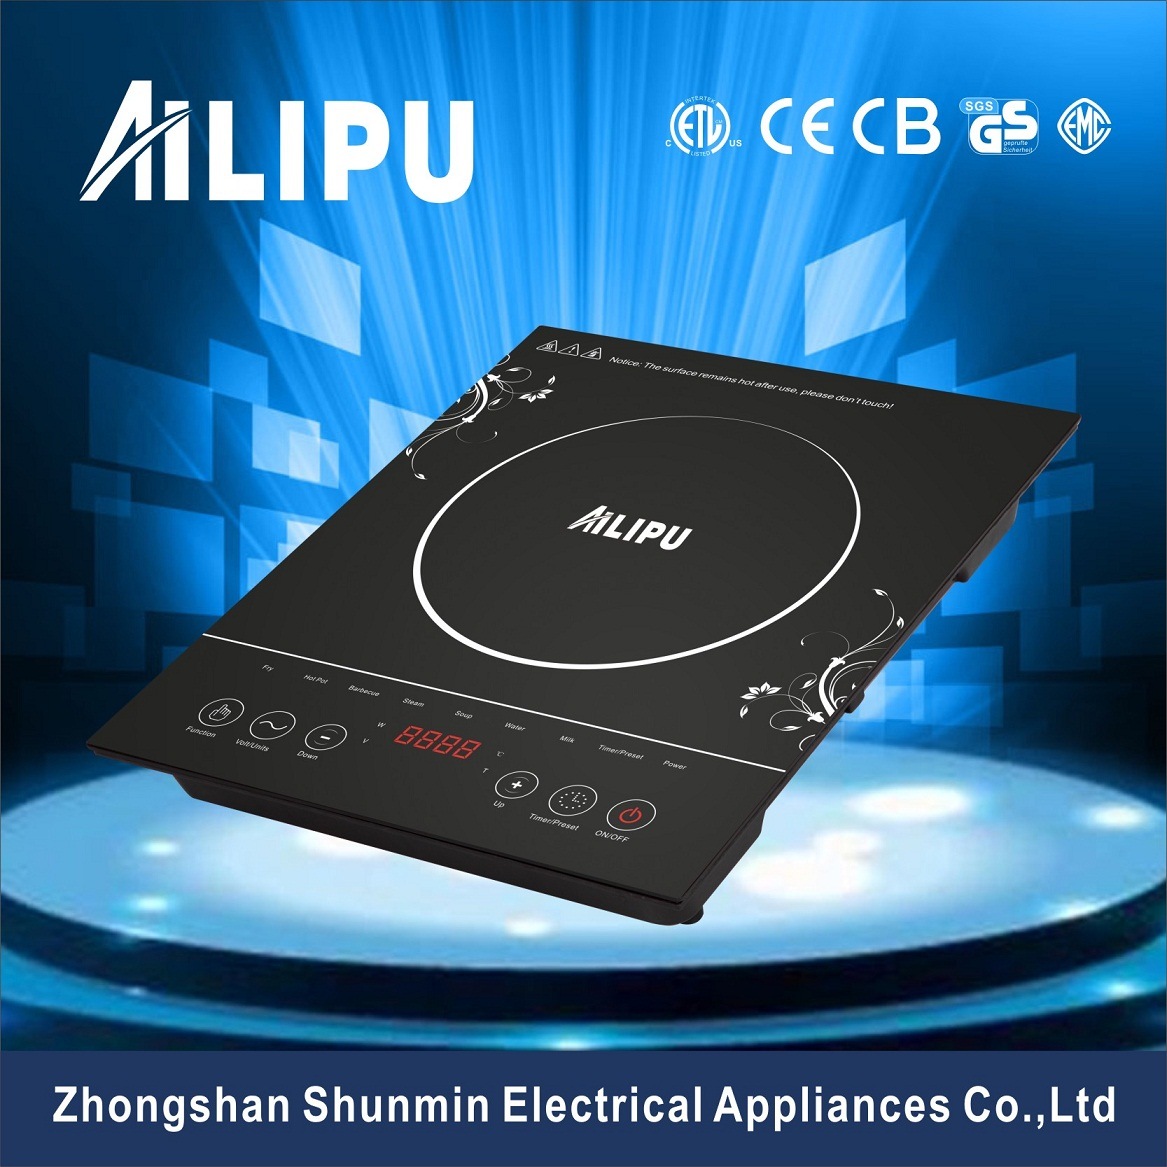 CB CE EMC Approval Electrical Induction Cooker with Sensor Touch Control Sm22-A79